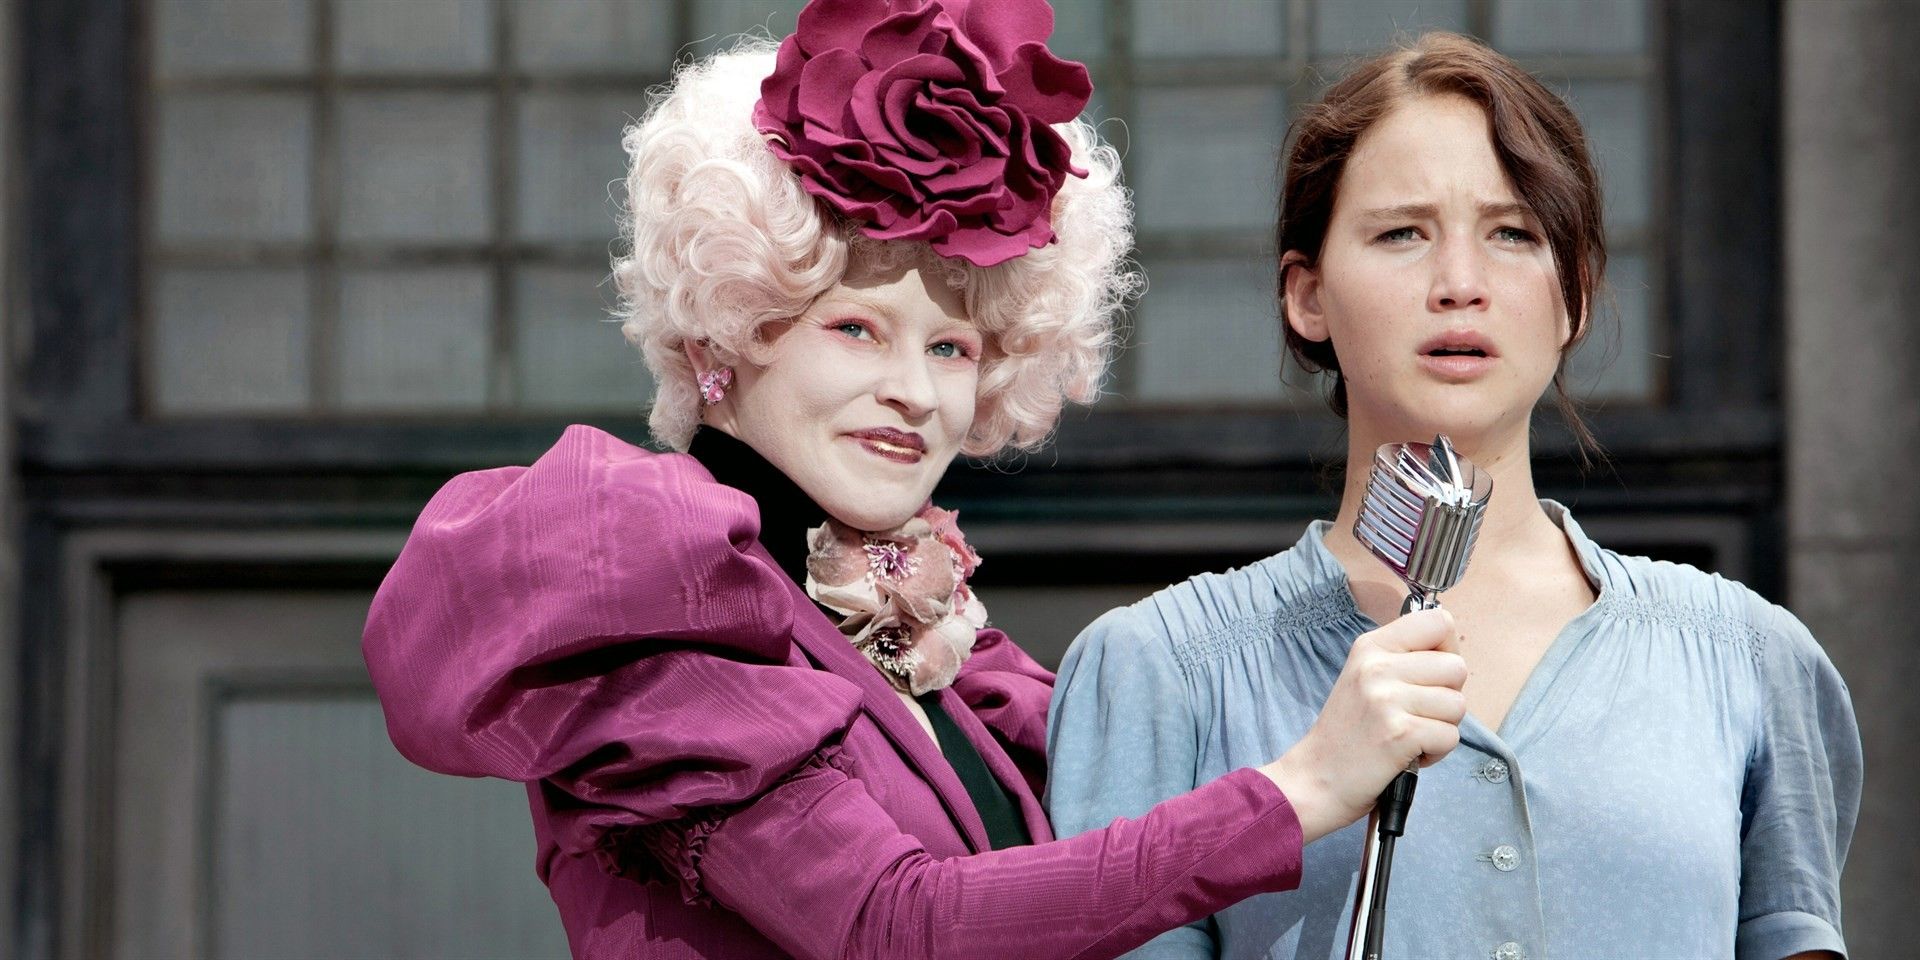 Effie and Katniss in The Hunger Games